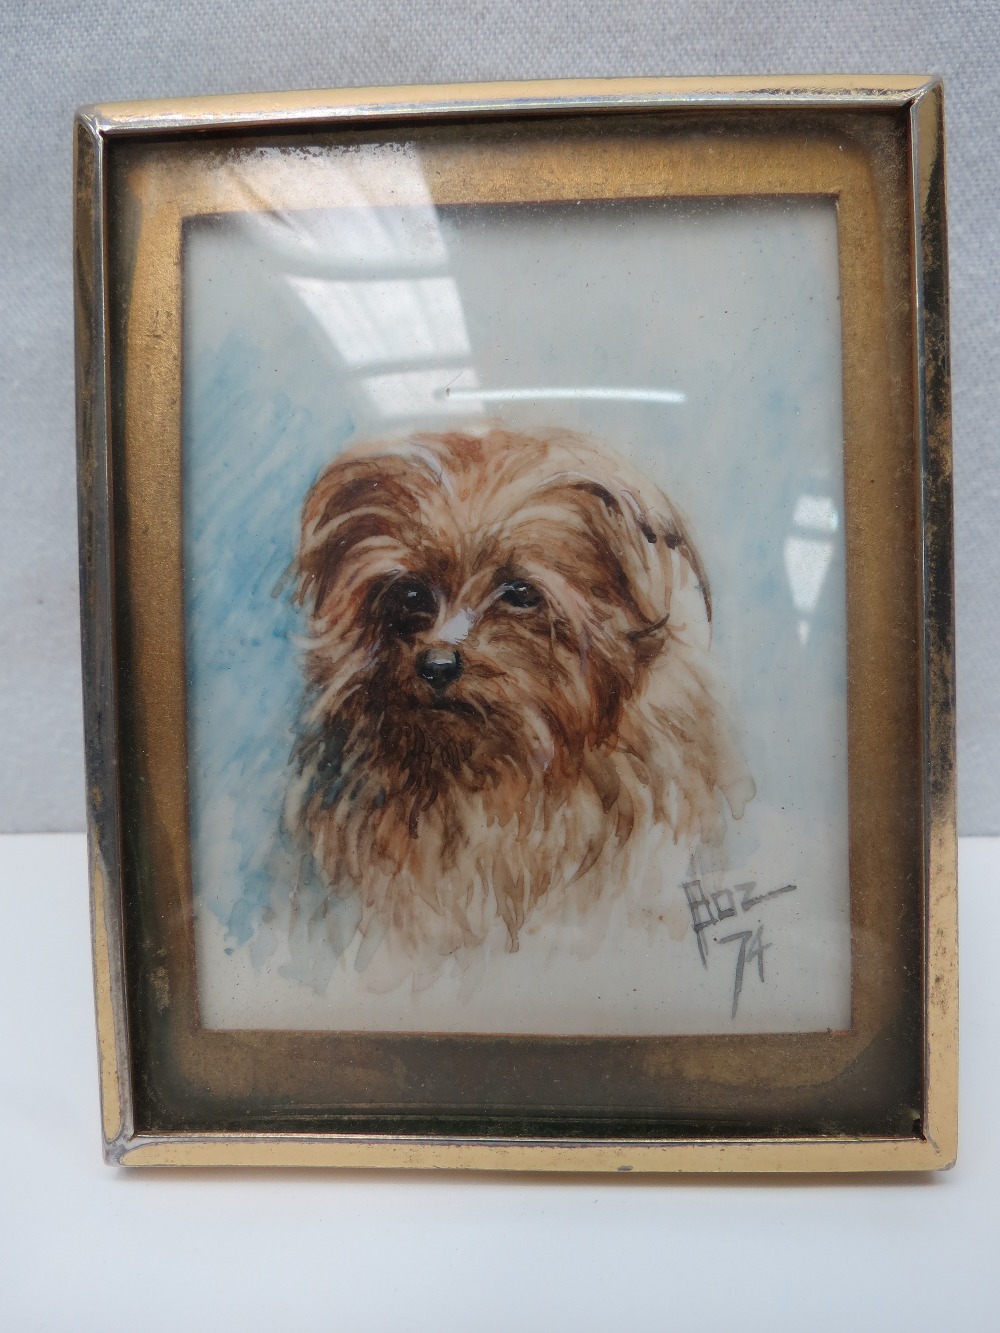 A framed miniature watercolour painting of a terrier.